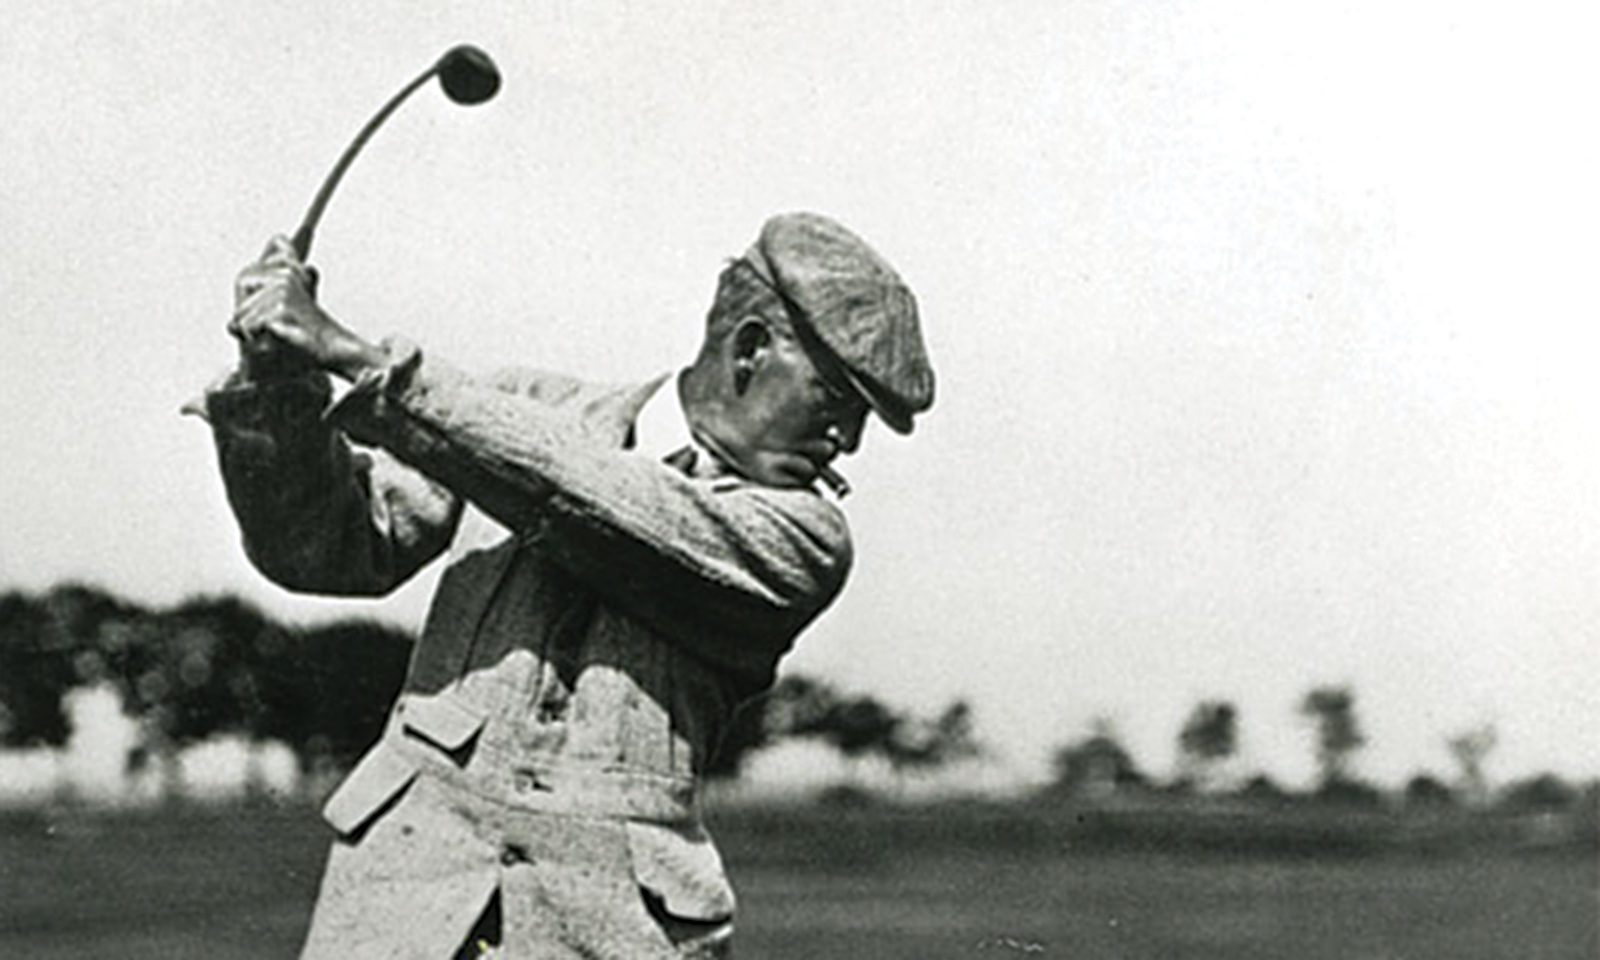 Orange County’s first golf course was built in Peters Canyon in 1899